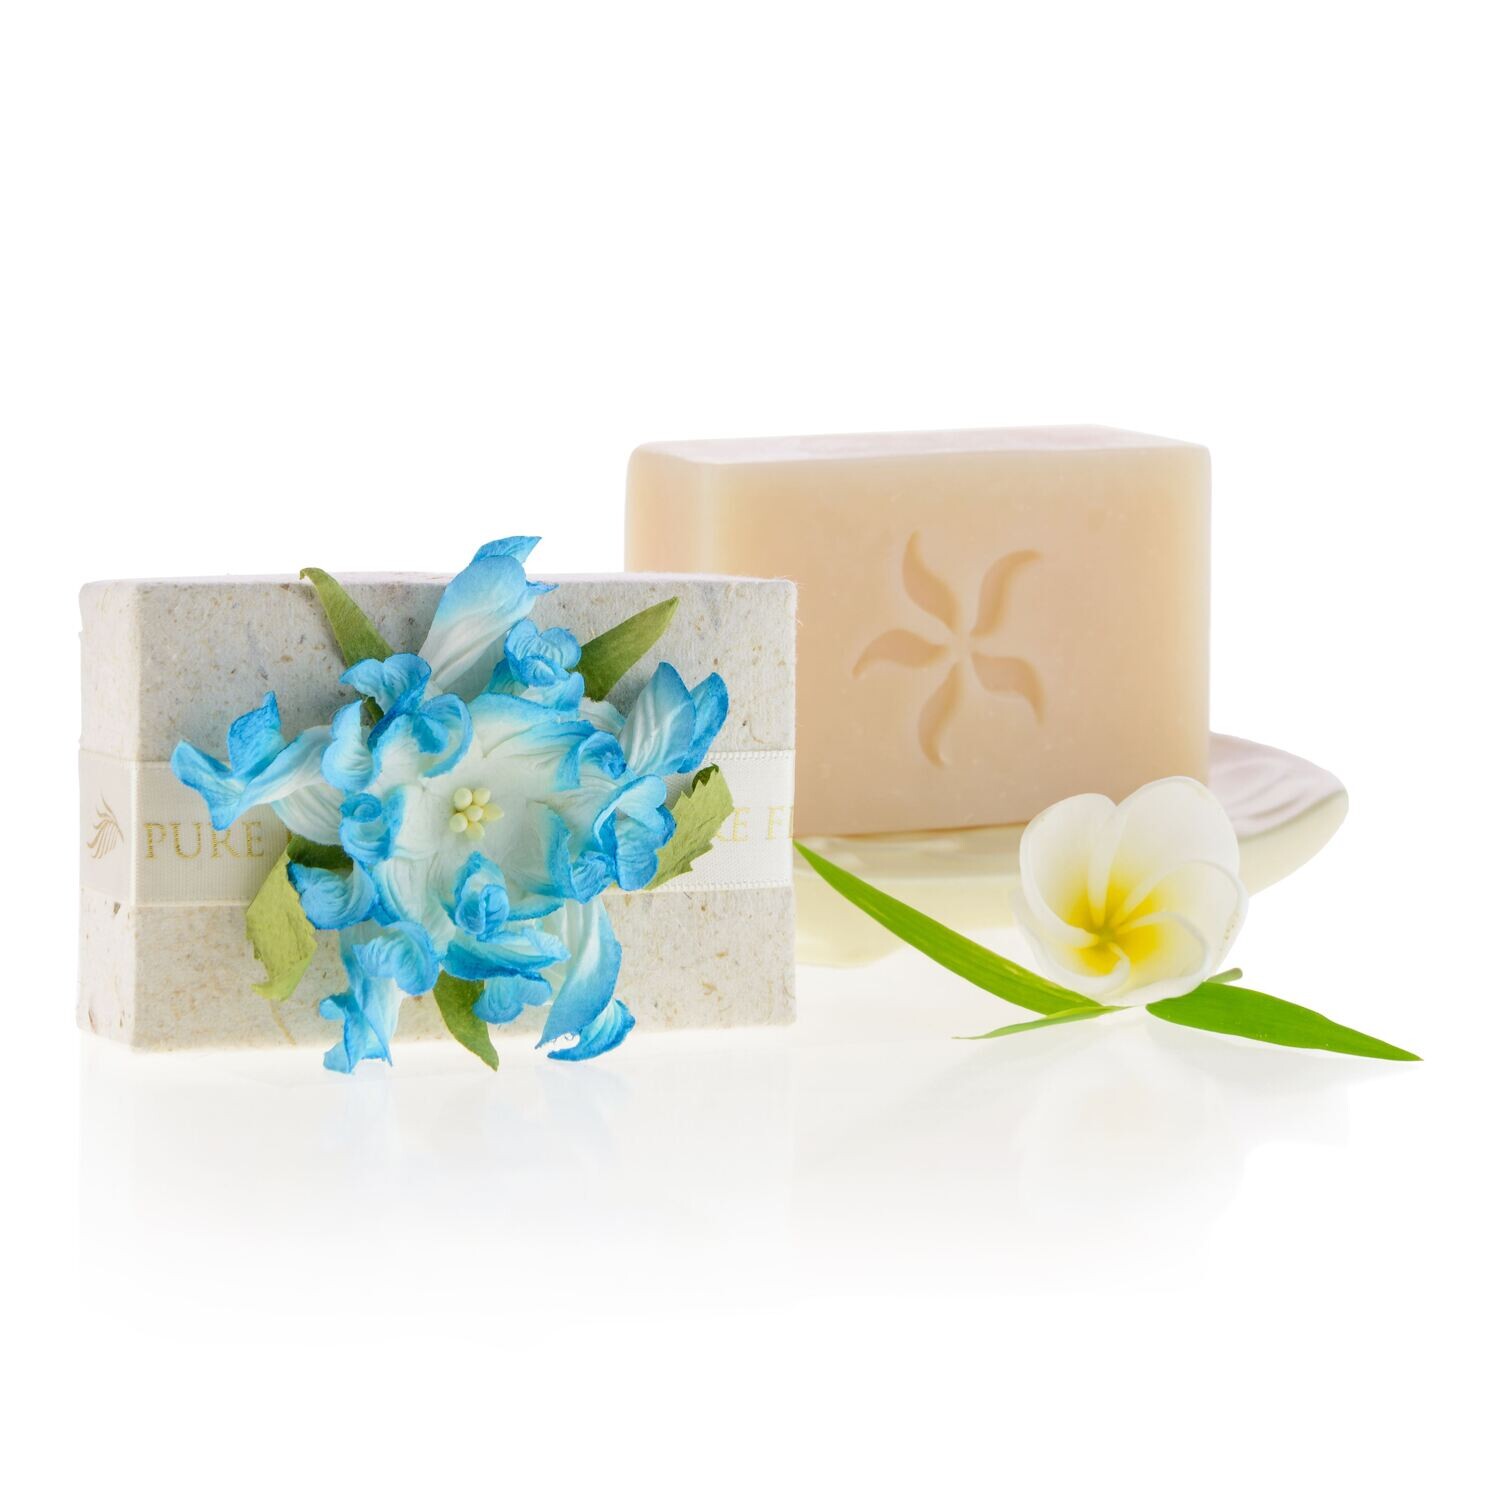 Pure Fiji Spa Soap 100g Coconut - Handmade Paper Wrapping